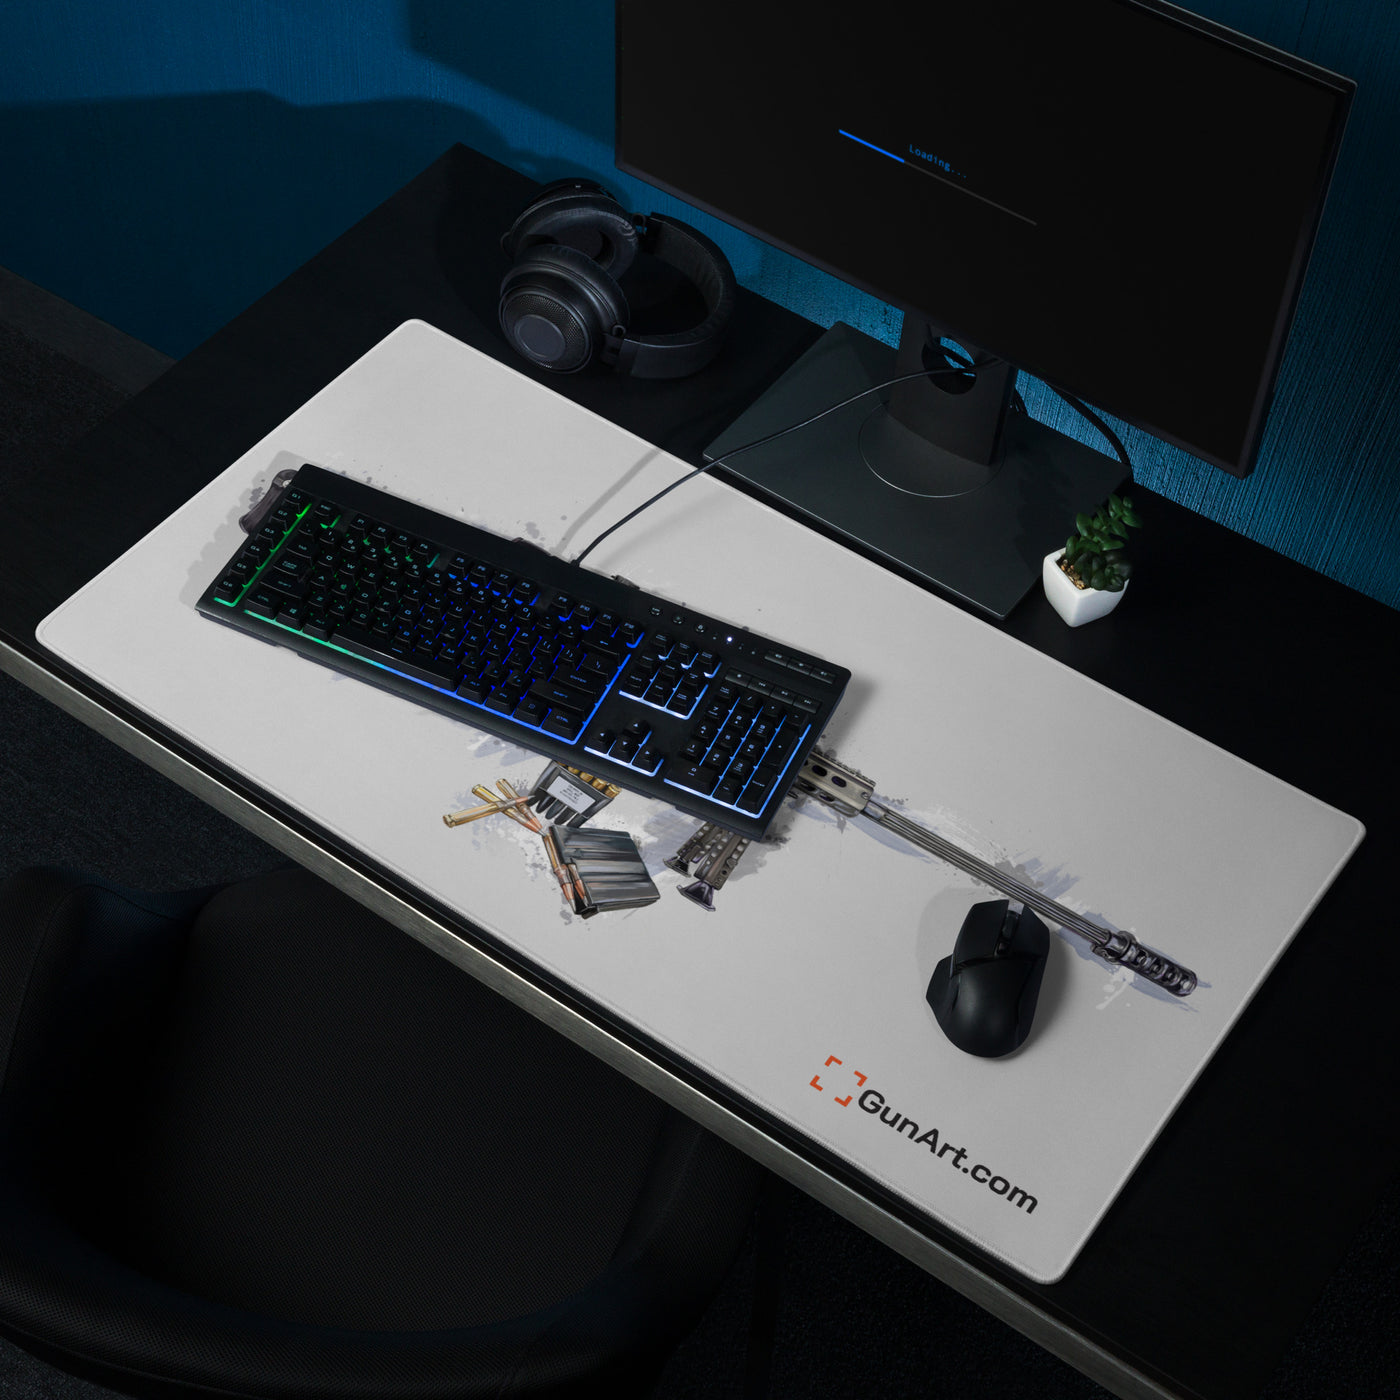 The Long-Range Legend - Blue .50 Cal BMG Rifle Gaming Mouse Pad - Grey Background